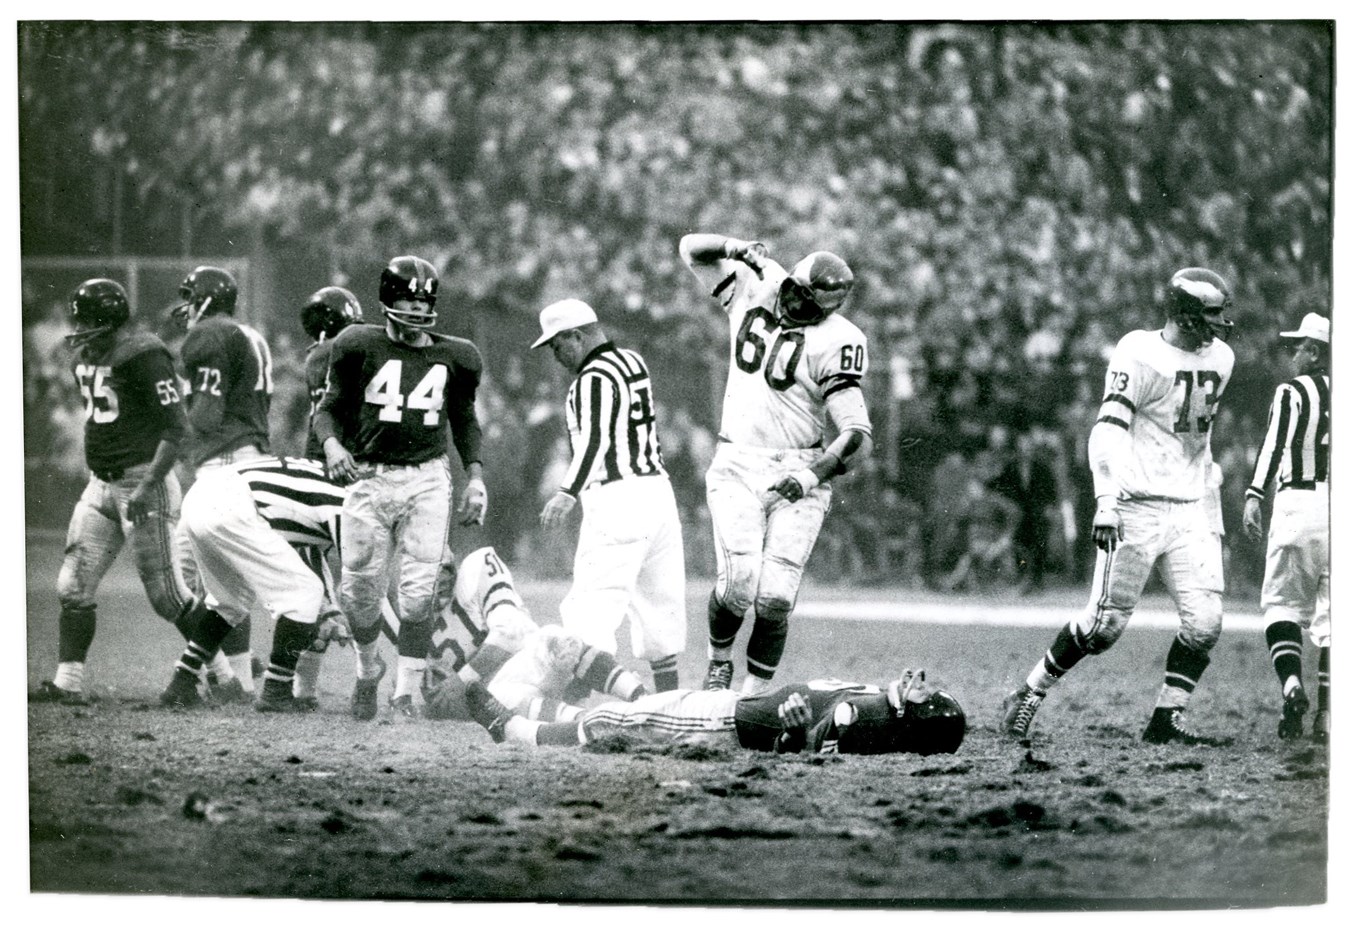 1960 Classic Sports Illustrated Type I Photo - Bednarik Crushes Frank Gifford by John Zimmerman